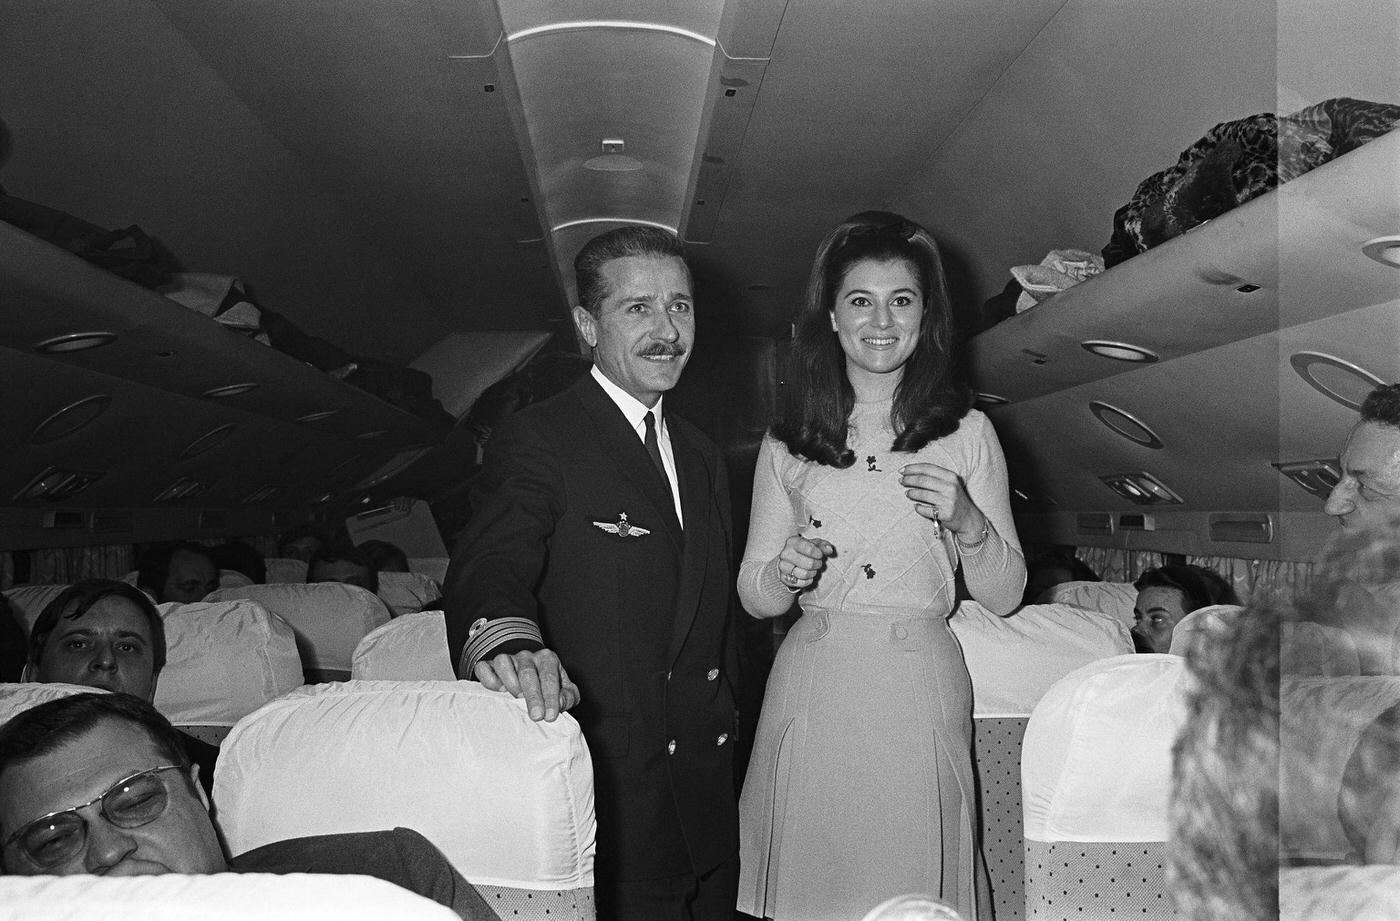 Sheila smiling next to the pilot of an airplane that brought her from Paris to Nice for the world premiere of the film "Bang-bang" in 1967.